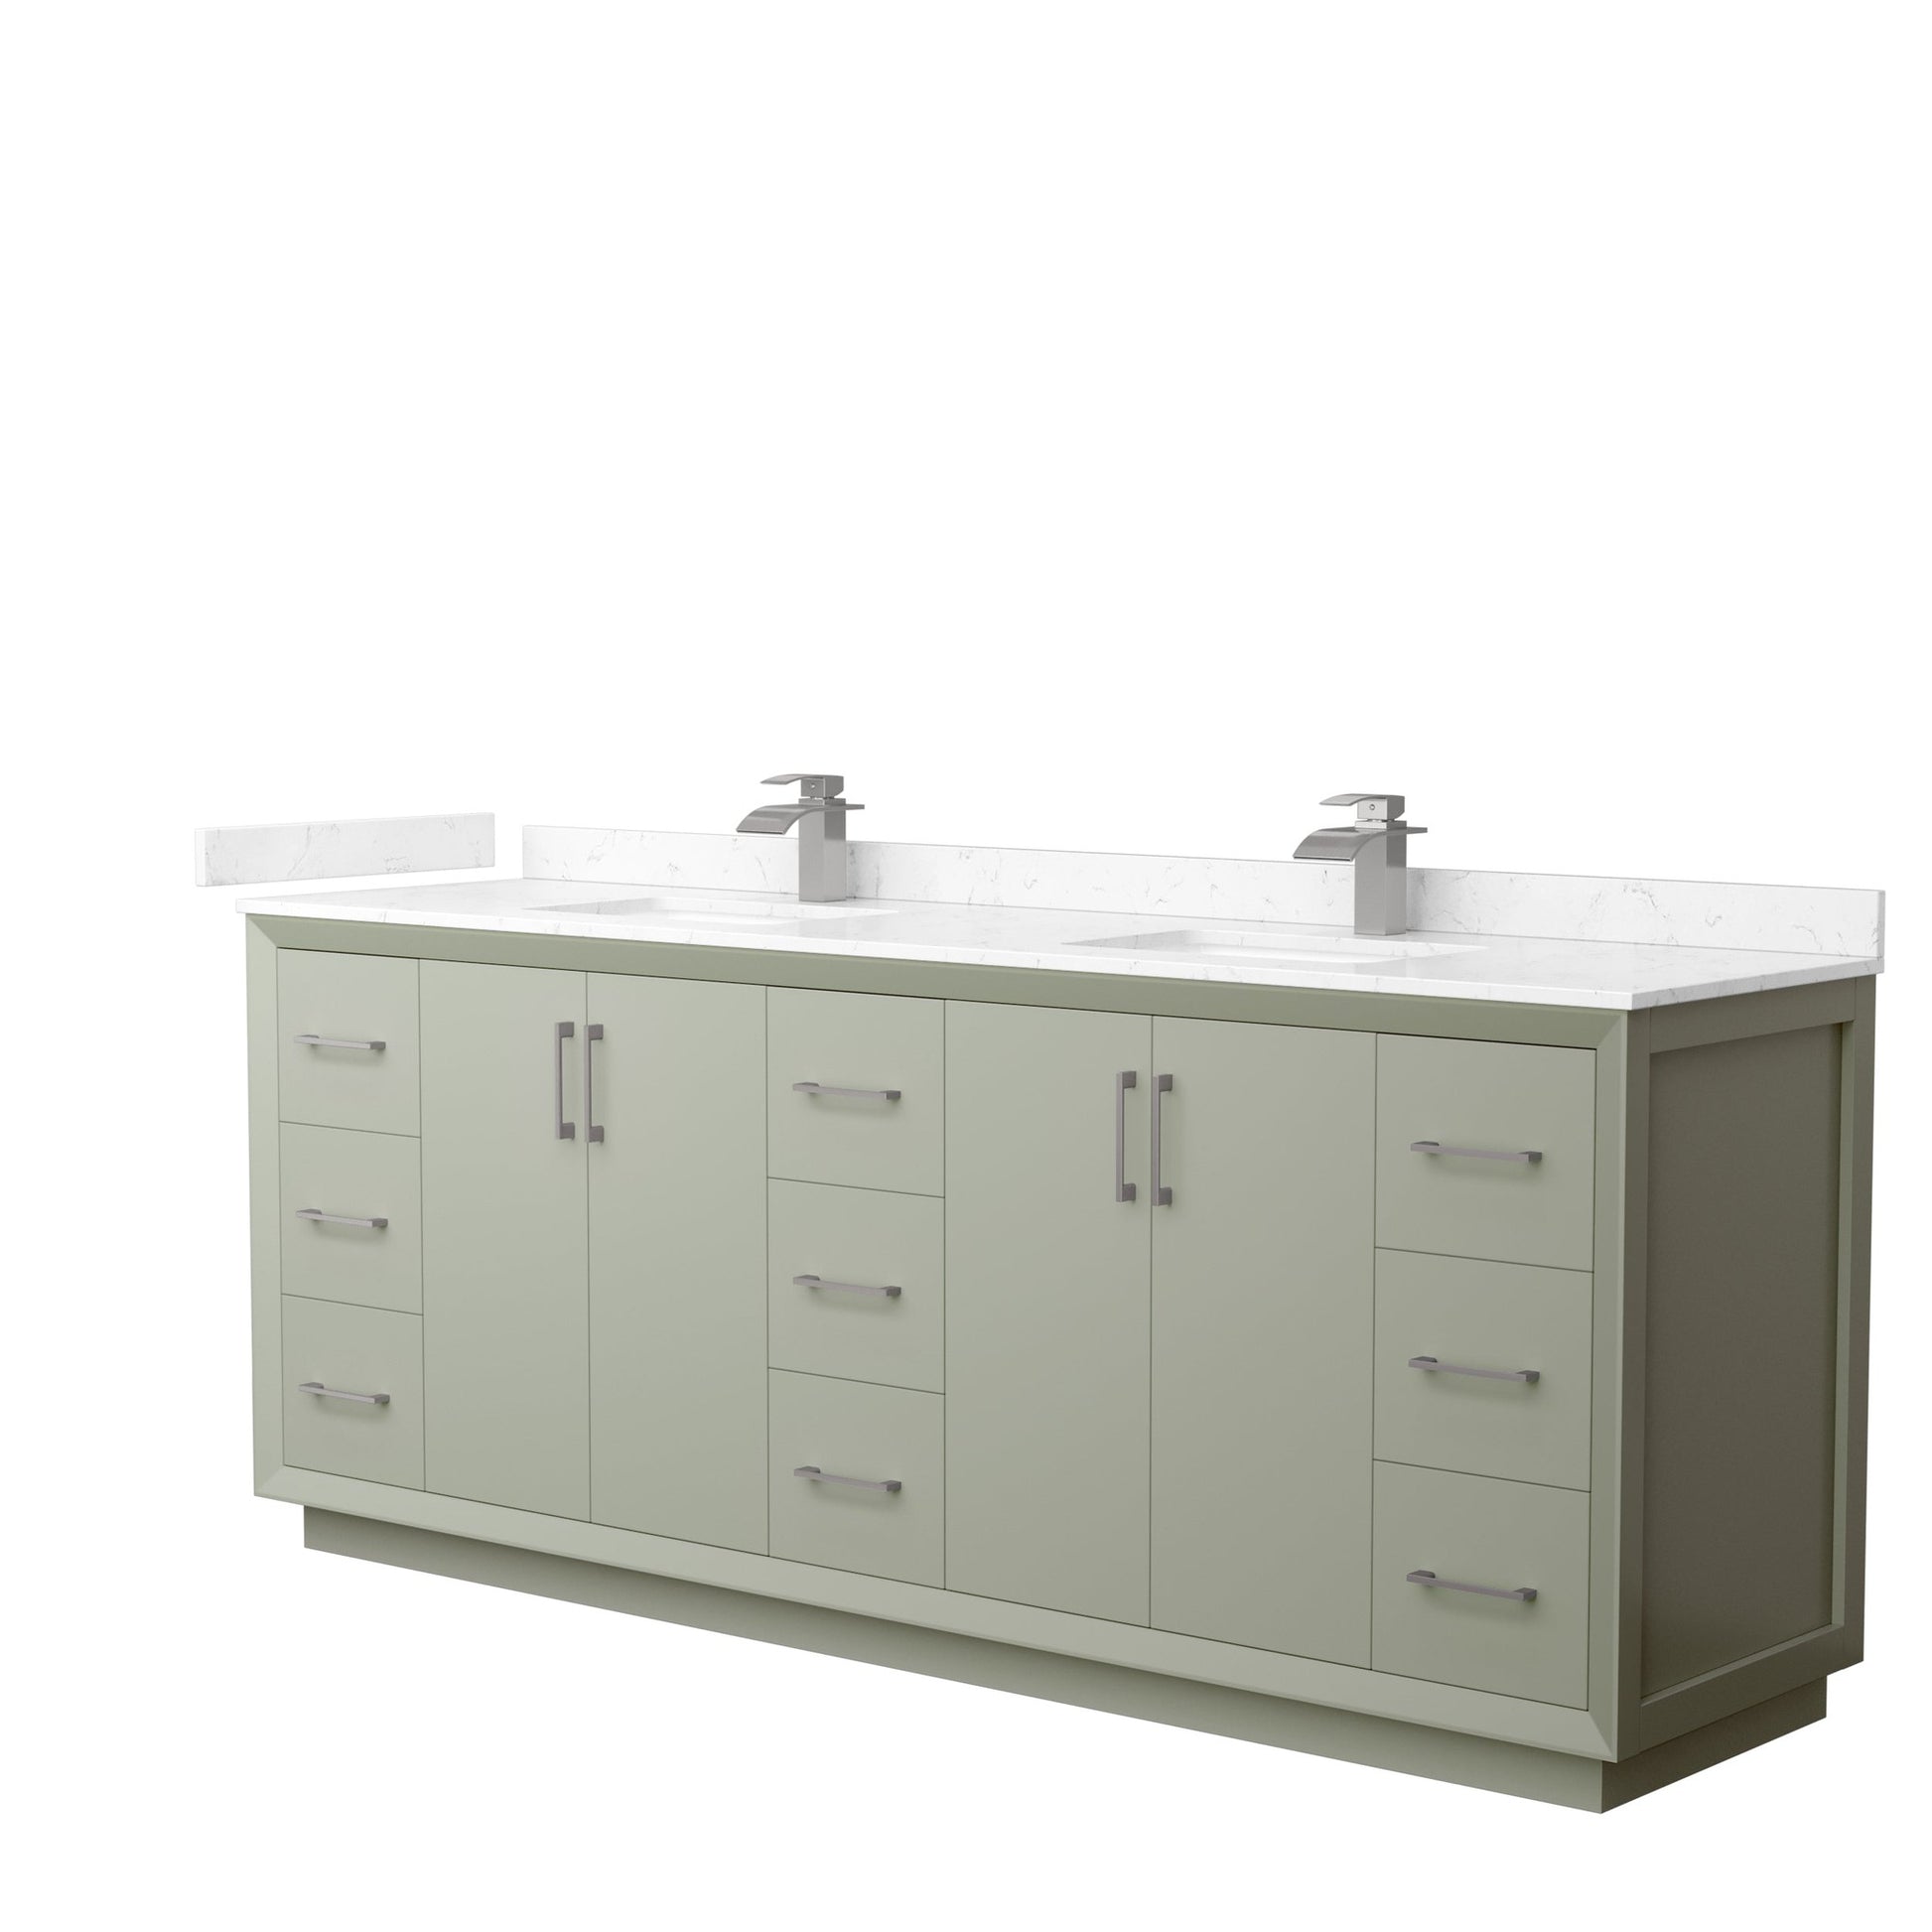 Wyndham Collection Strada 84" Double Bathroom Vanity in Light Green, Carrara Cultured Marble Countertop, Undermount Square Sinks, Brushed Nickel Trim